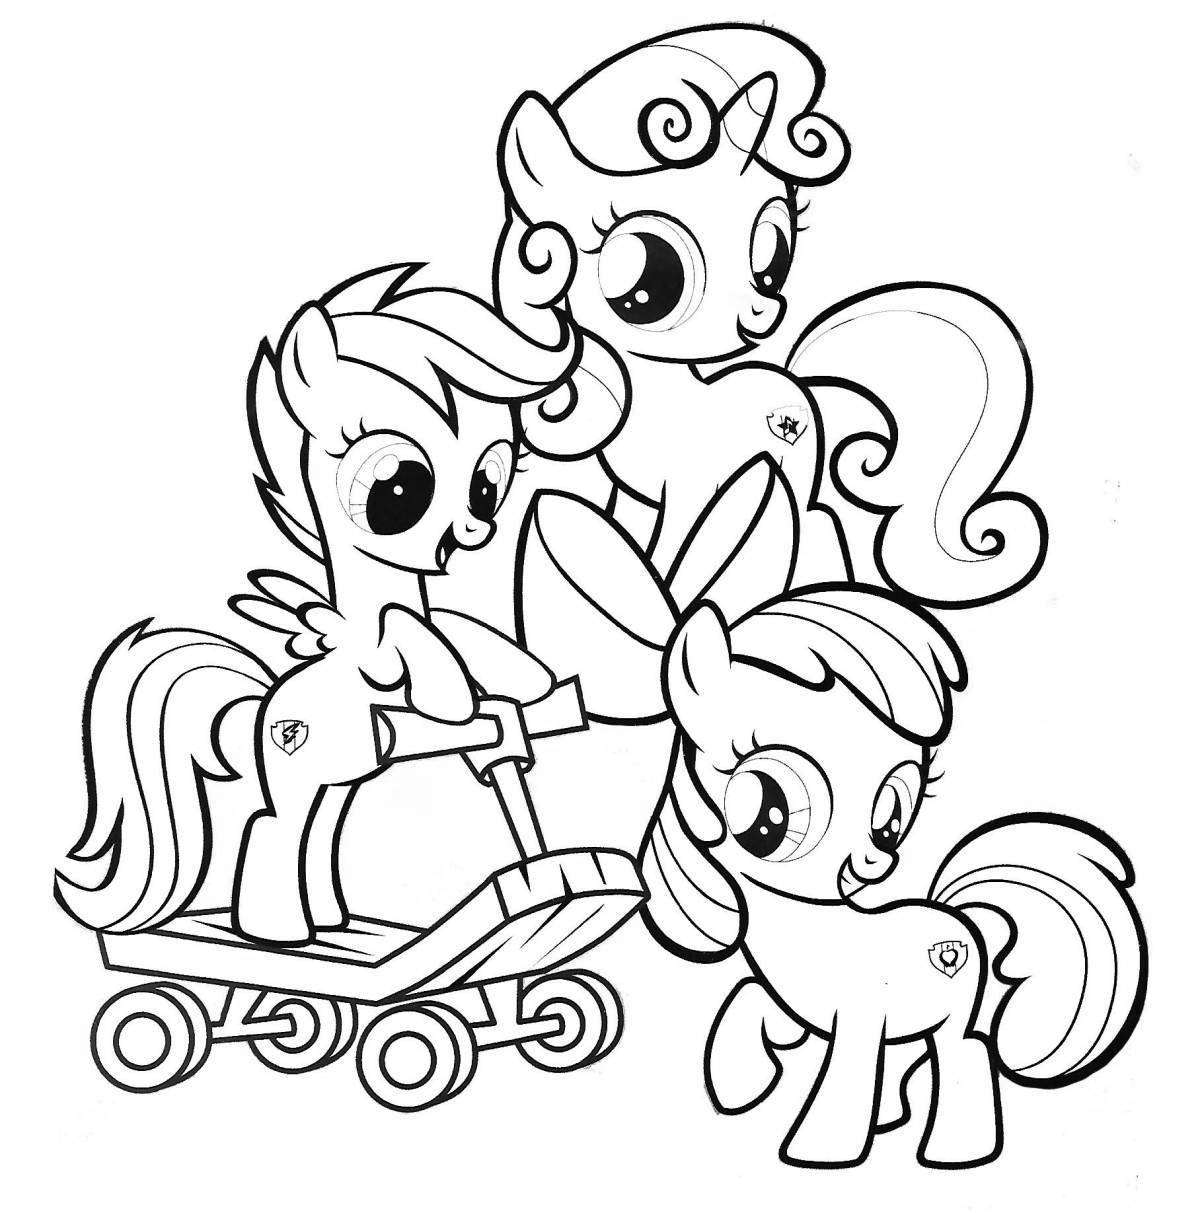 Lovely lot of ponies coloring page